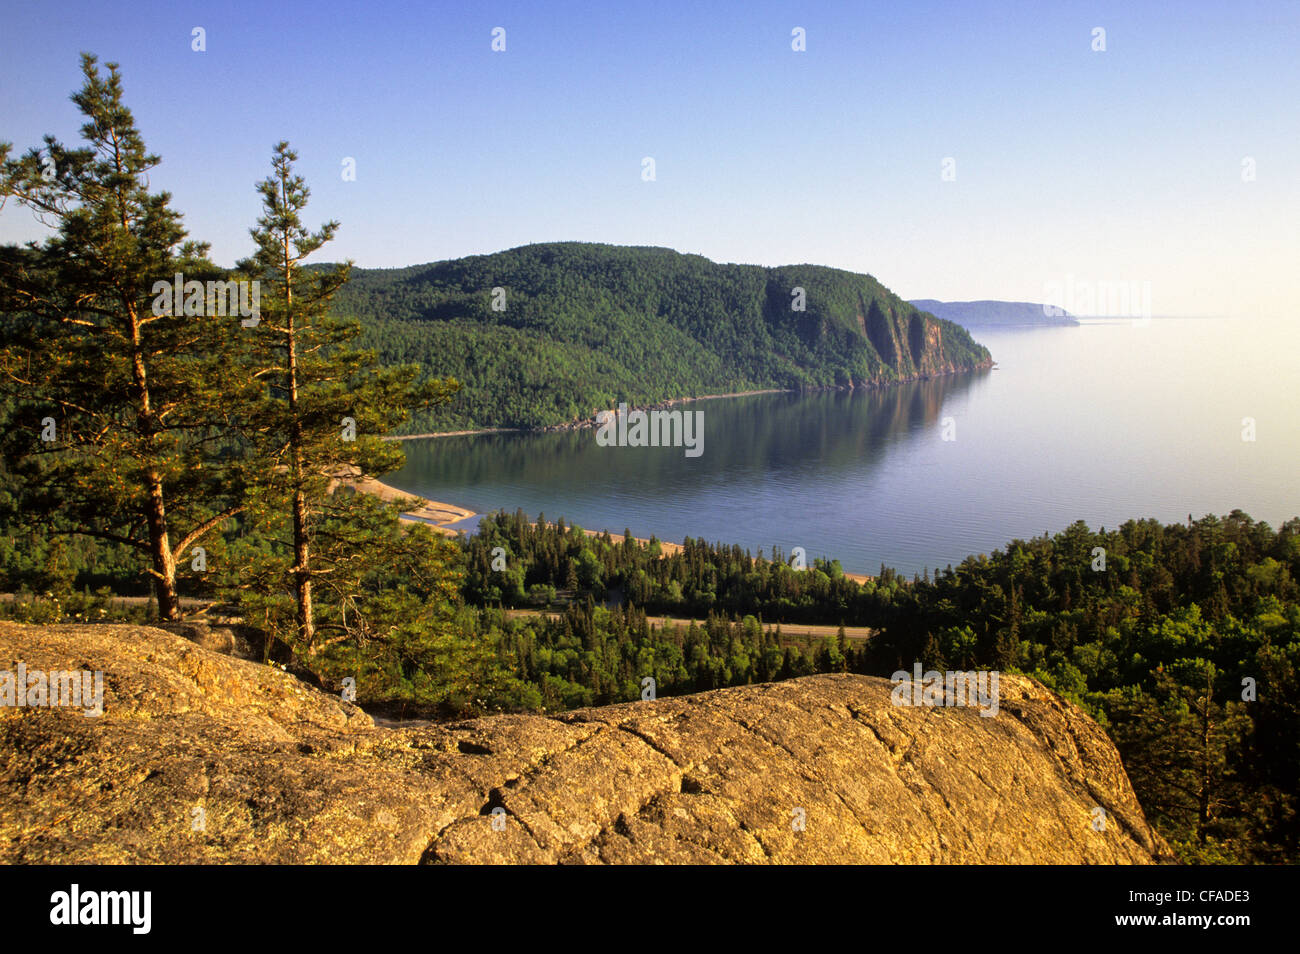 View of Old Woman's Bay at sunset, Lake Superior from atop the Nokomis Trail, Lake Superior Provincial Park, Ontario, Canada. Stock Photo